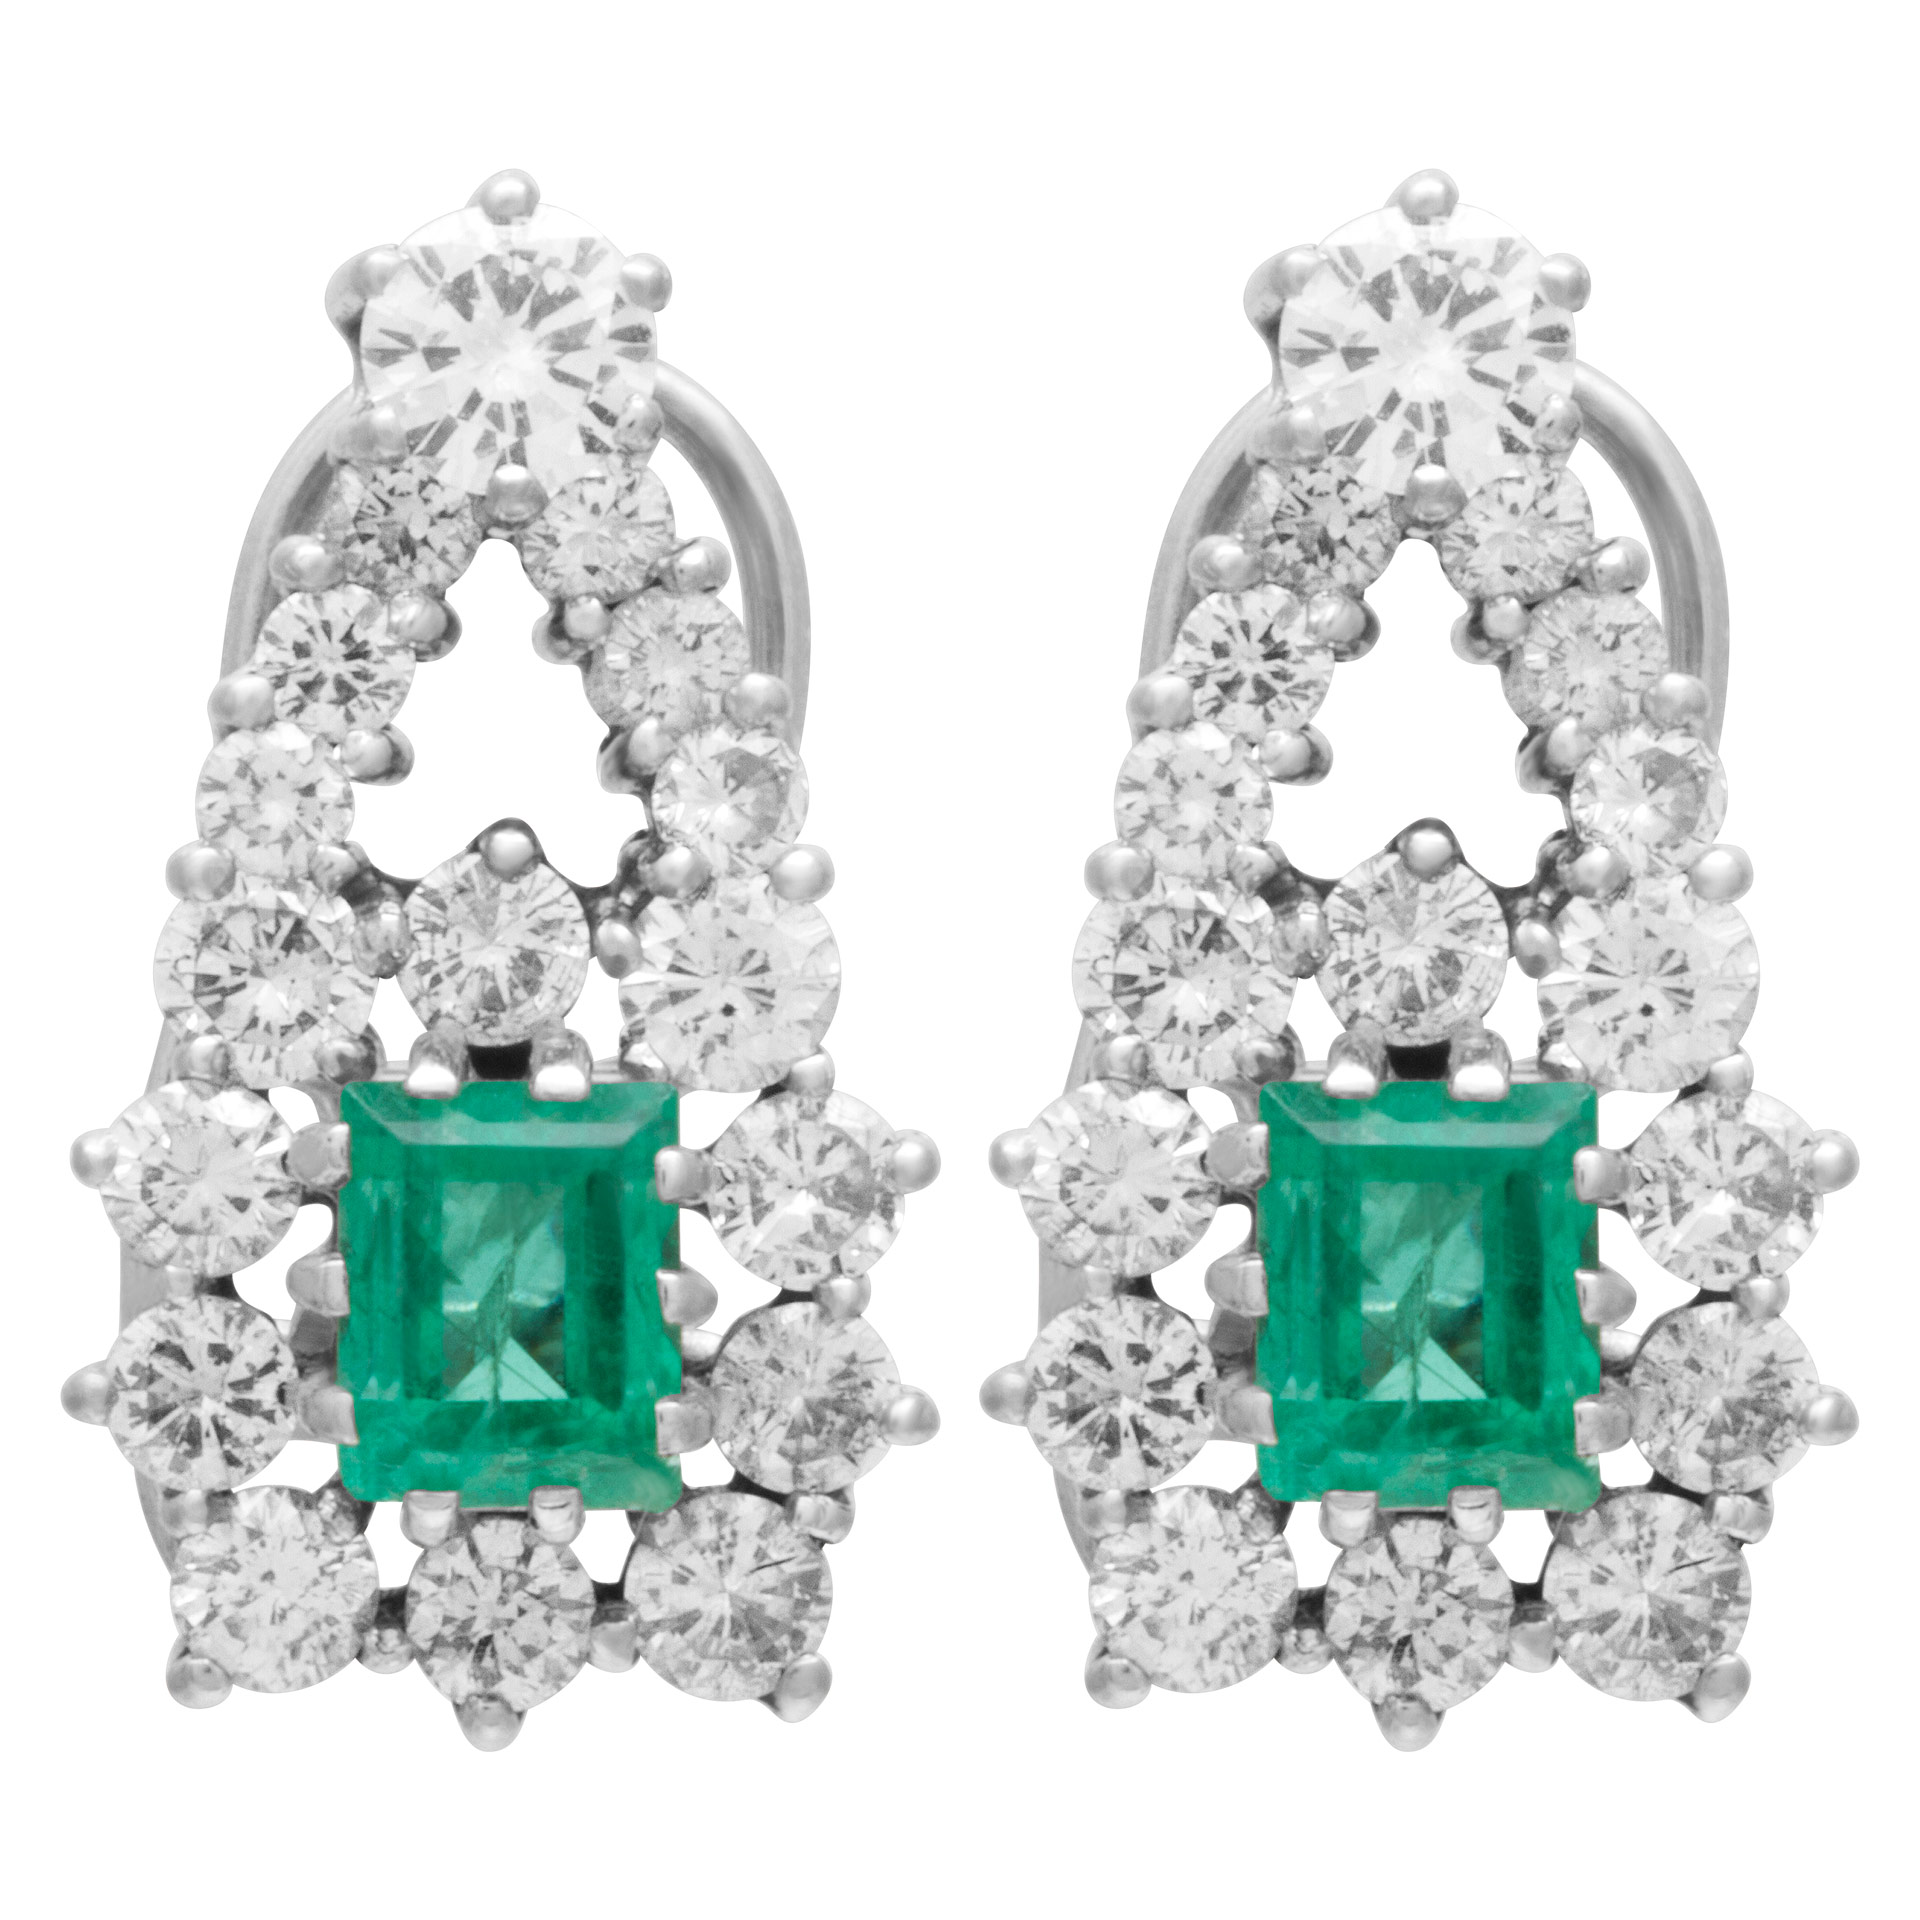 Diamond and colombian emerald earrings in 14k white gold